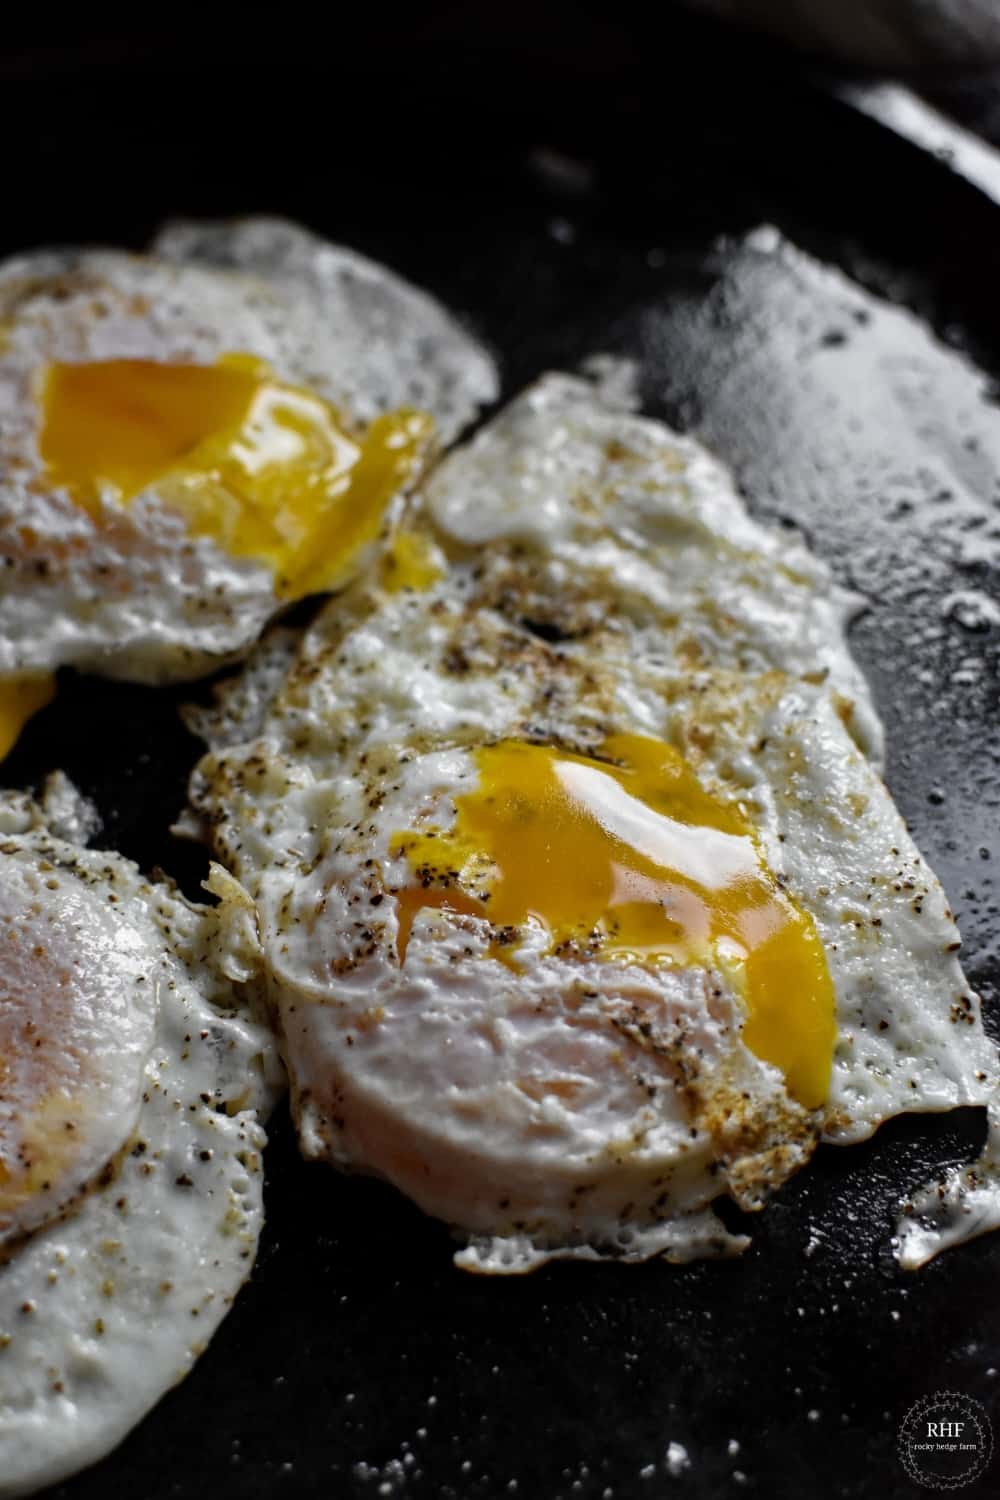 How to Fry an Egg - Perfect Fried Egg Over Easy, Medium & Hard Recipes